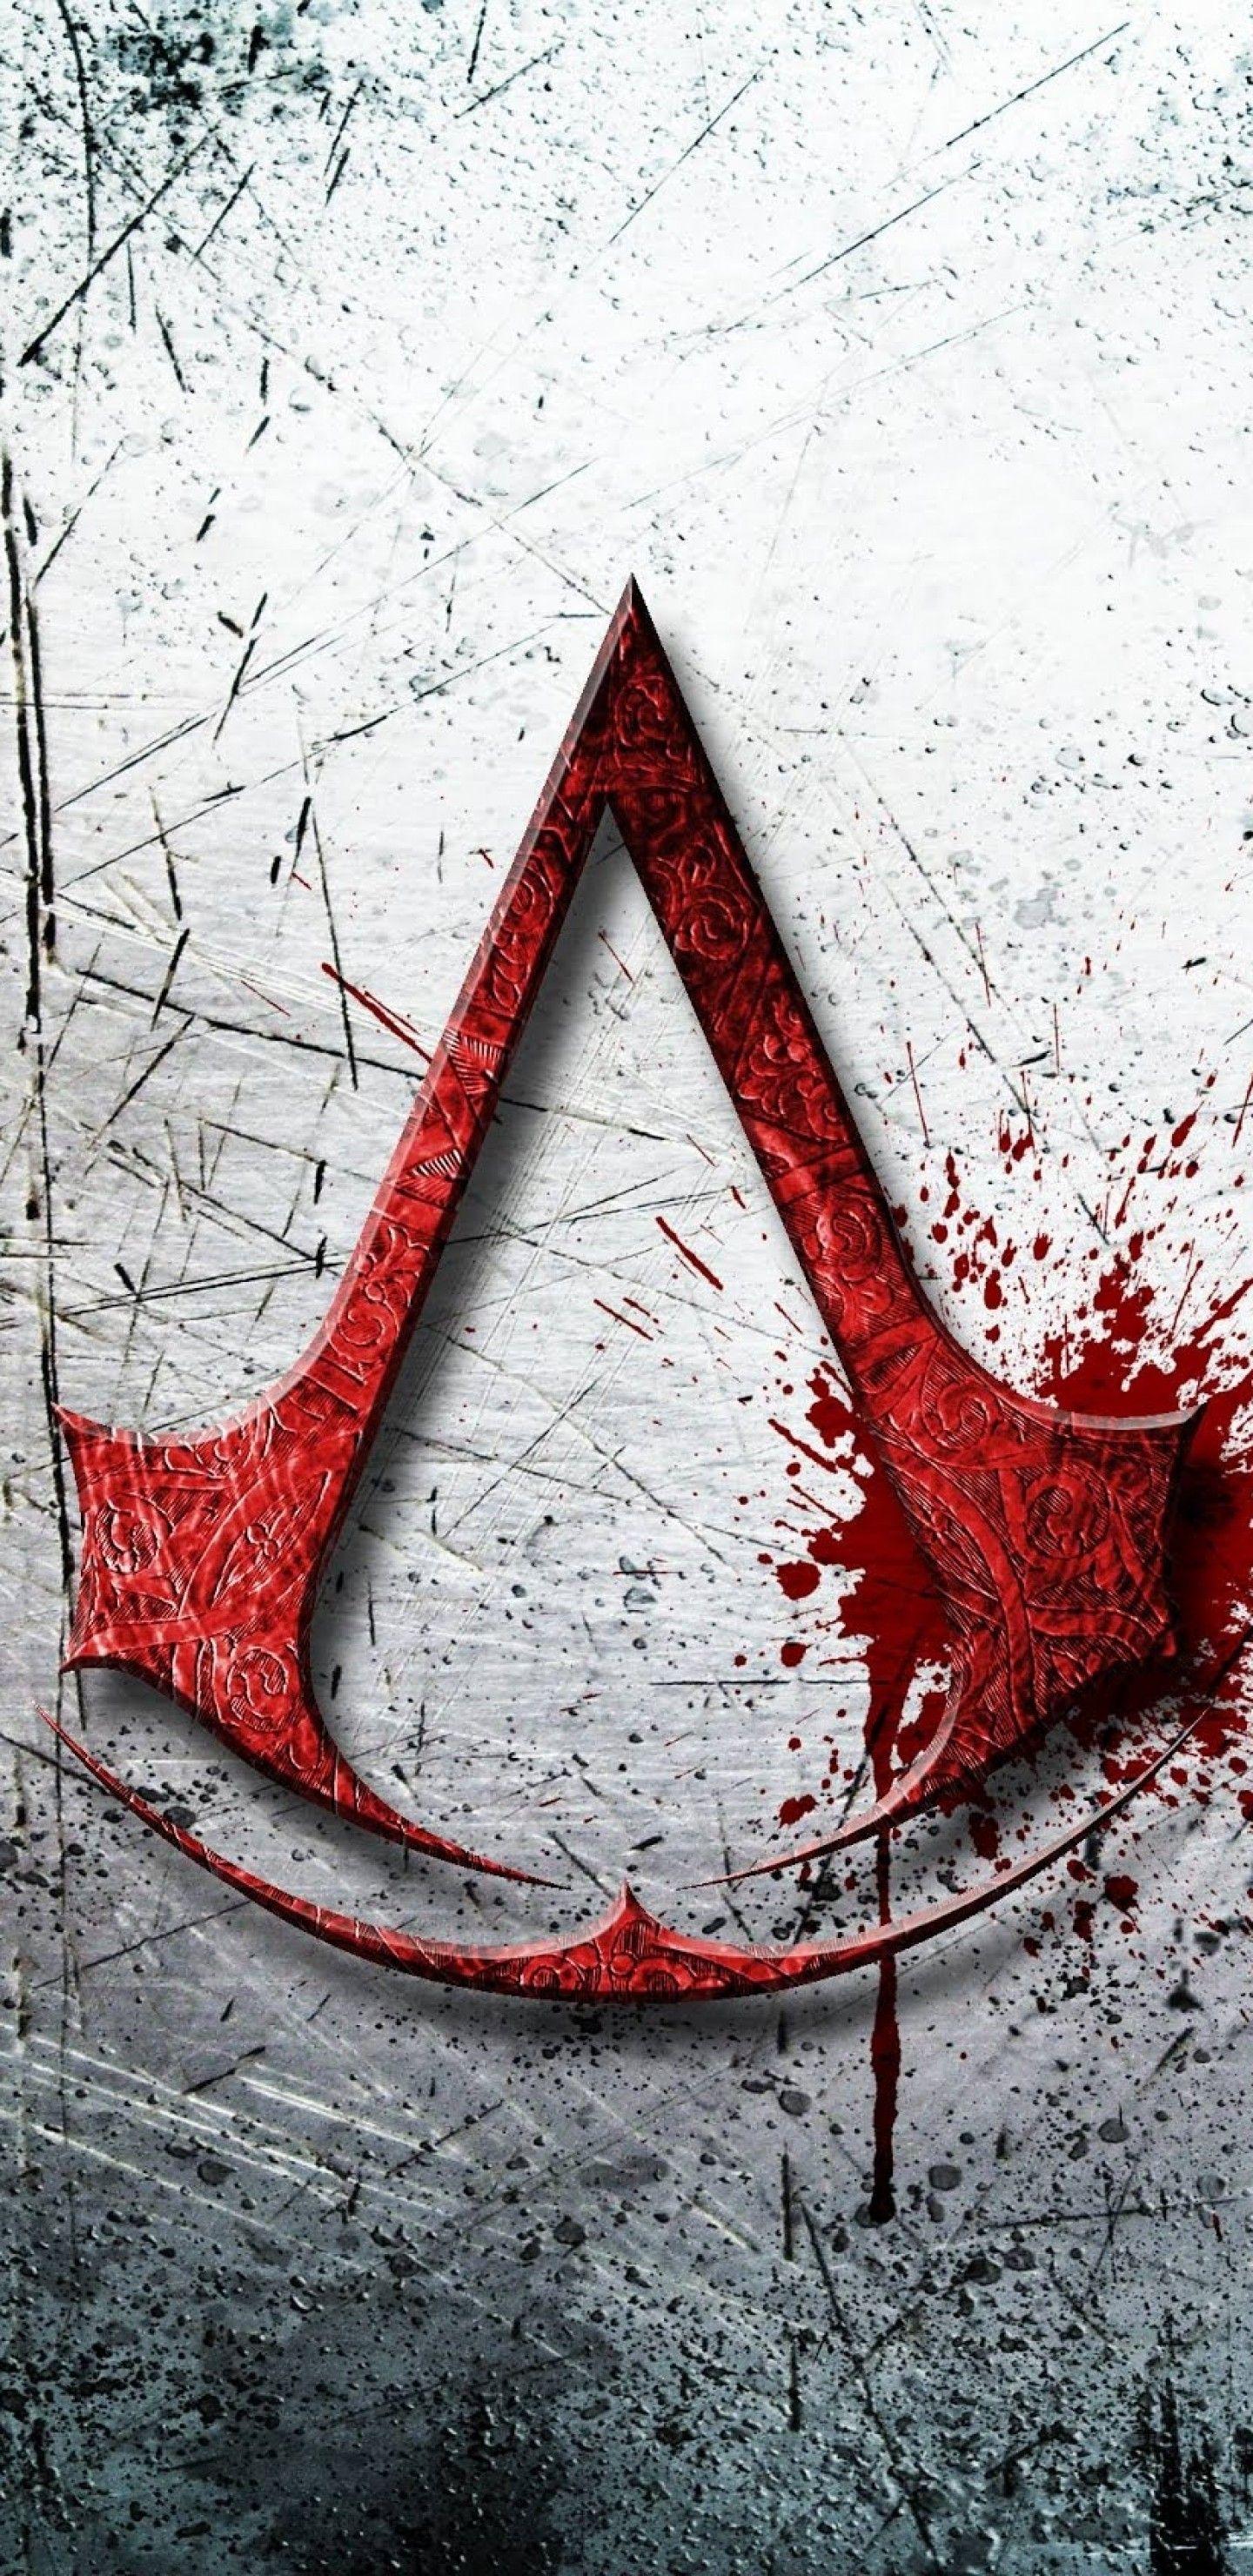 Iphone 5 wallpaper inspired by assassins creed by OtrusEncide on  DeviantArt